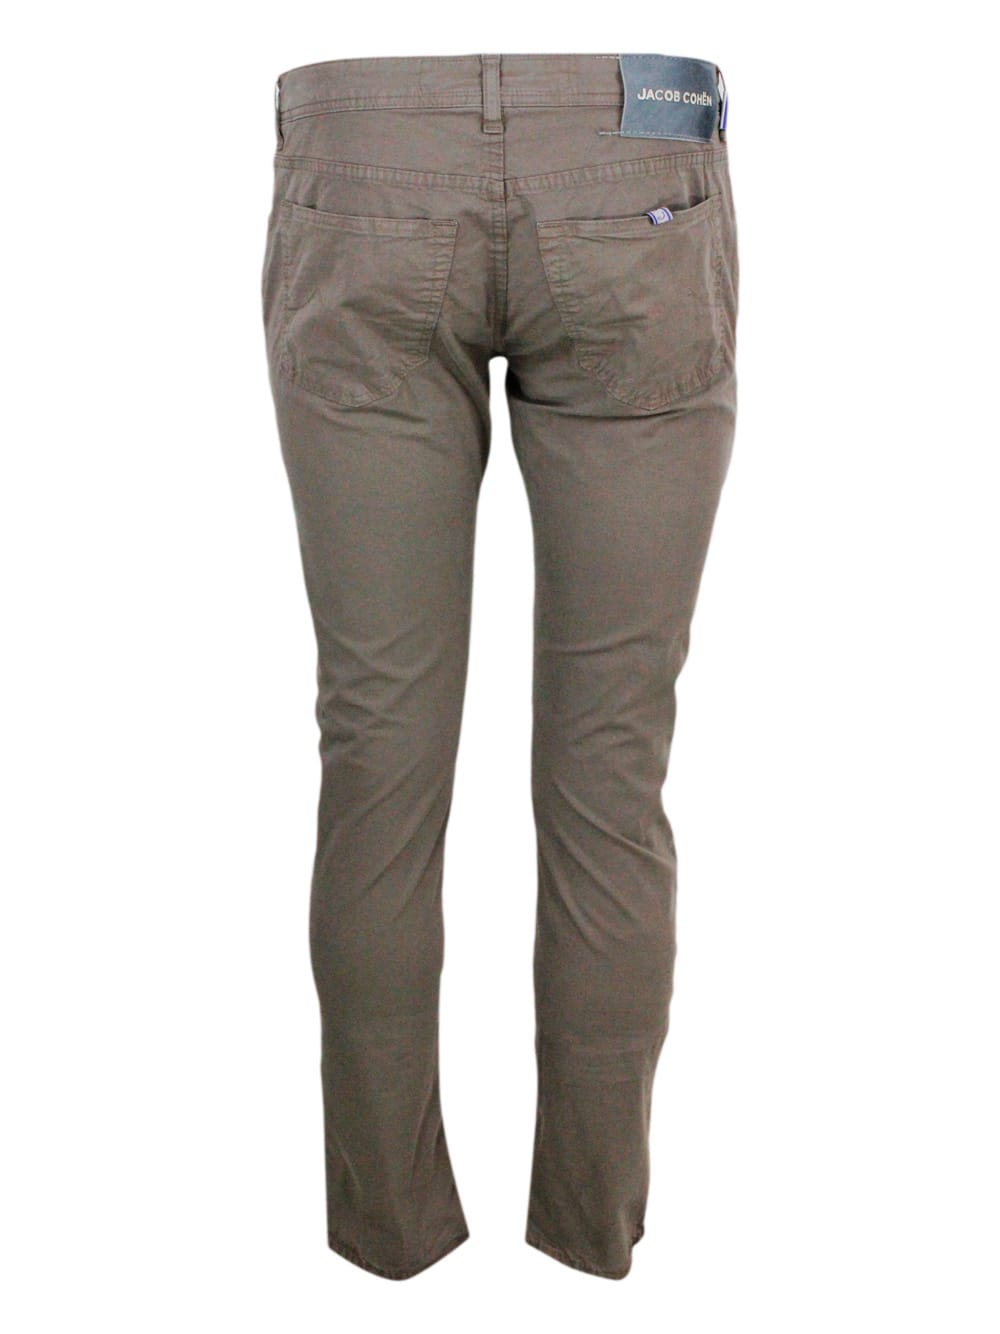 Shop Jacob Cohen Bard J688 Luxury Edition Trousers In Soft Stretch Cotton With 5 Pockets With Closure Buttons And Lac In Taupe